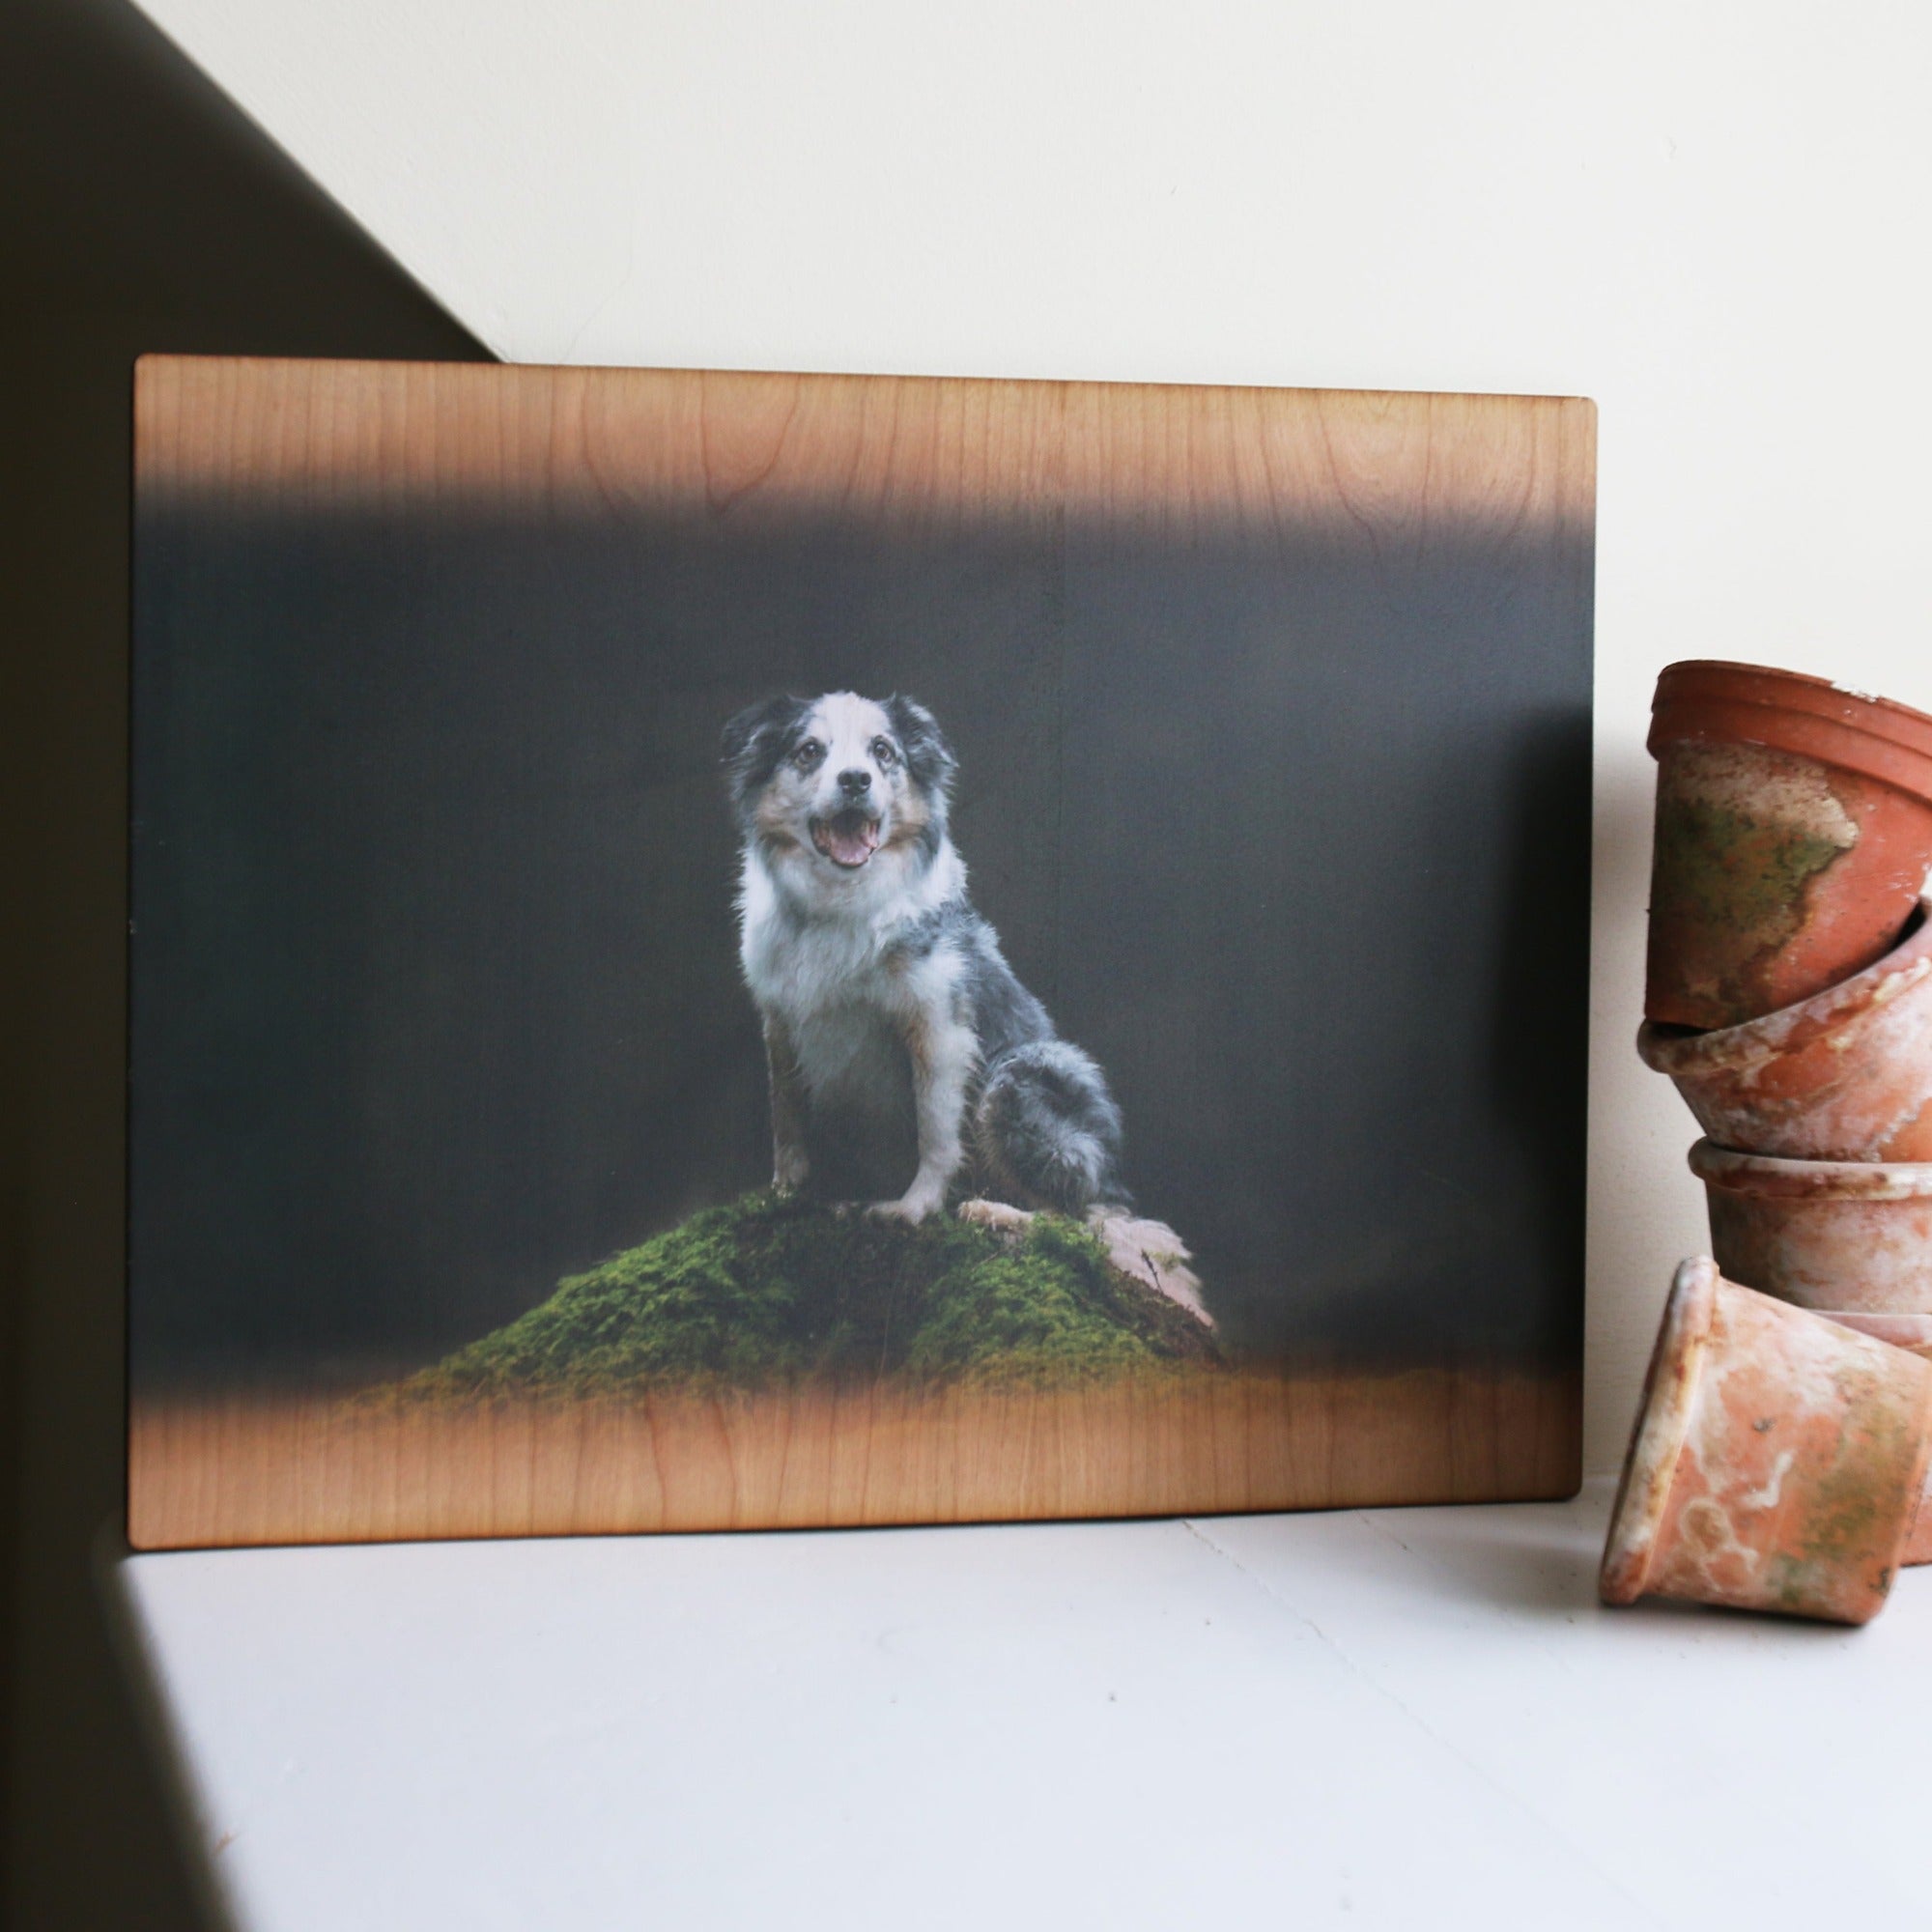 Large wooden photographic print